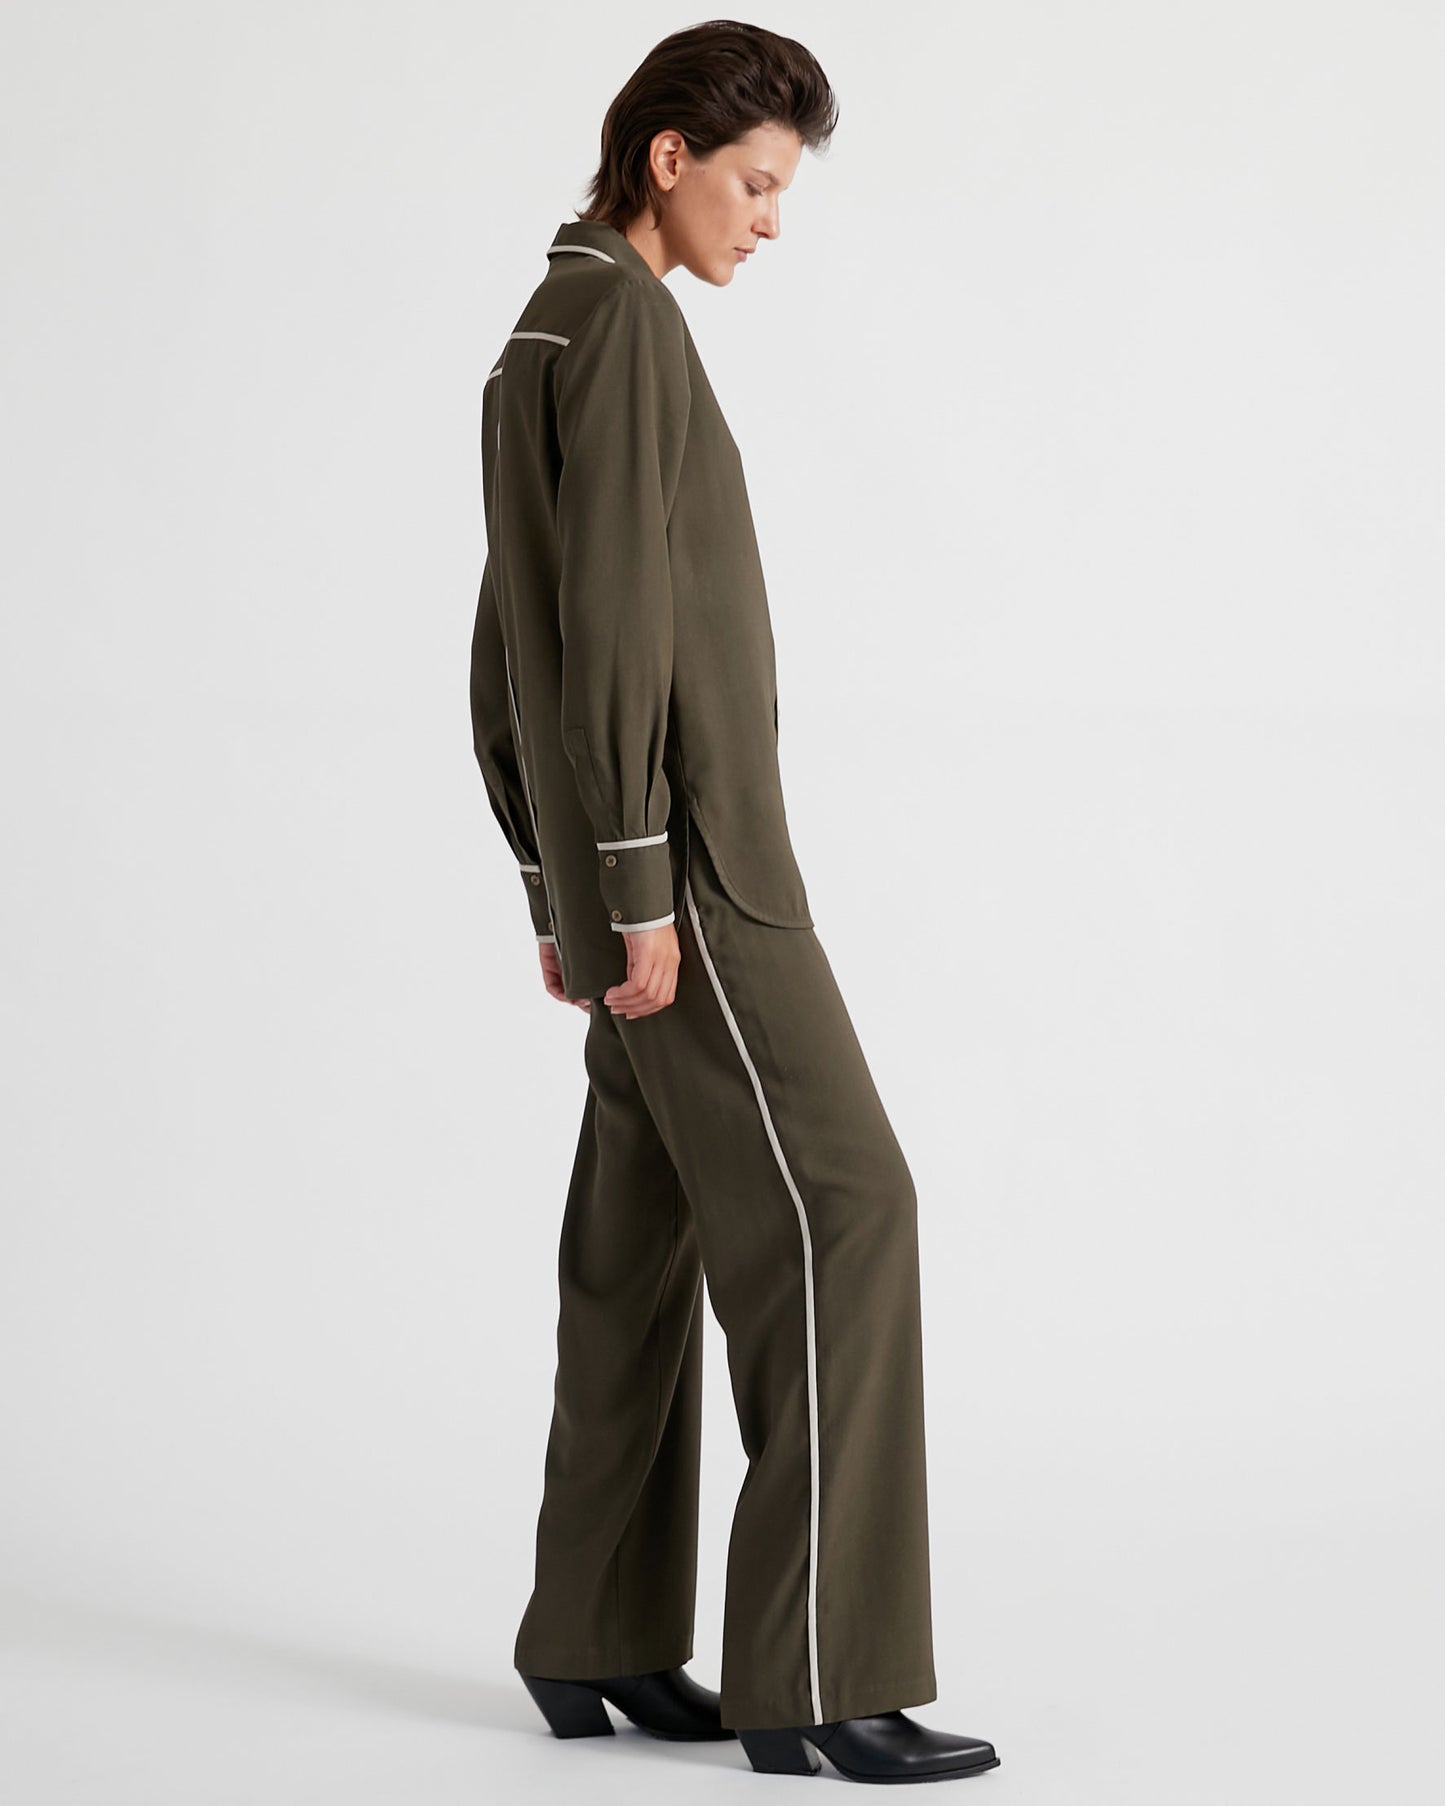 Go With The Flow Trousers